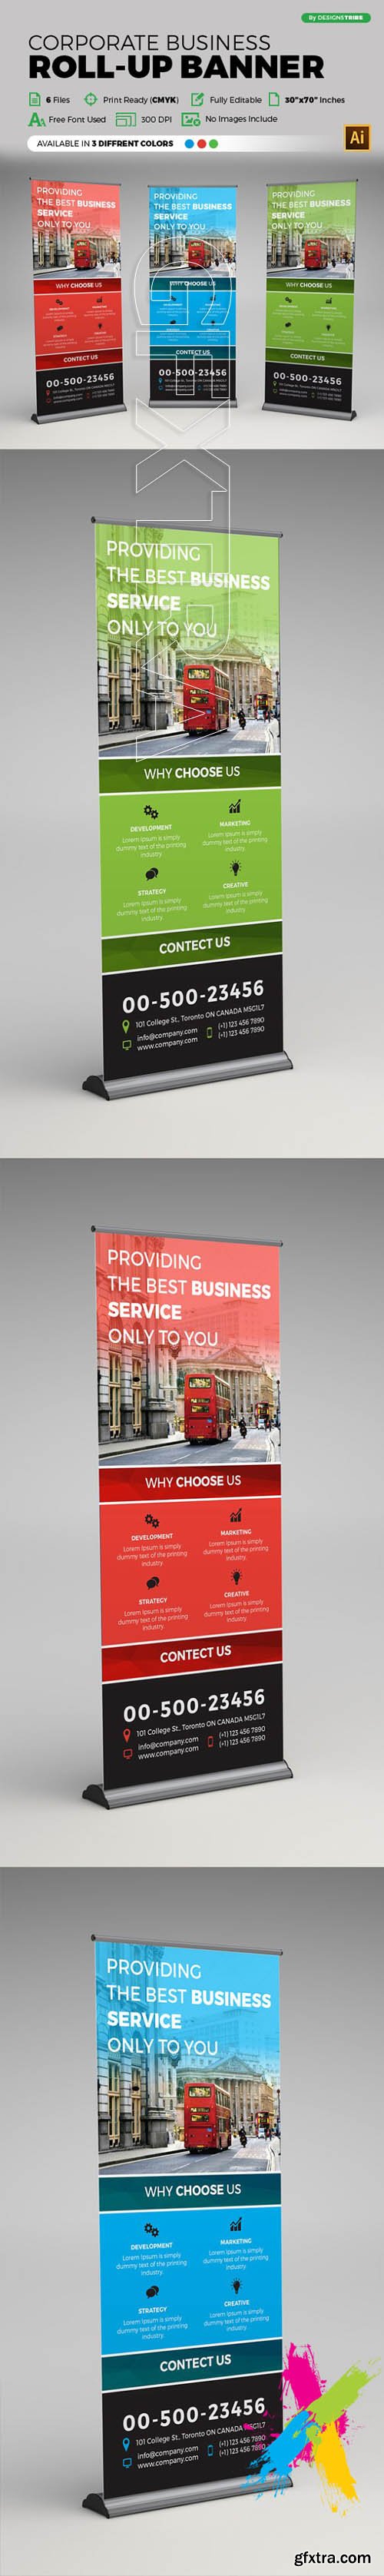 CM - Corporate Roll Up Banner 1512829